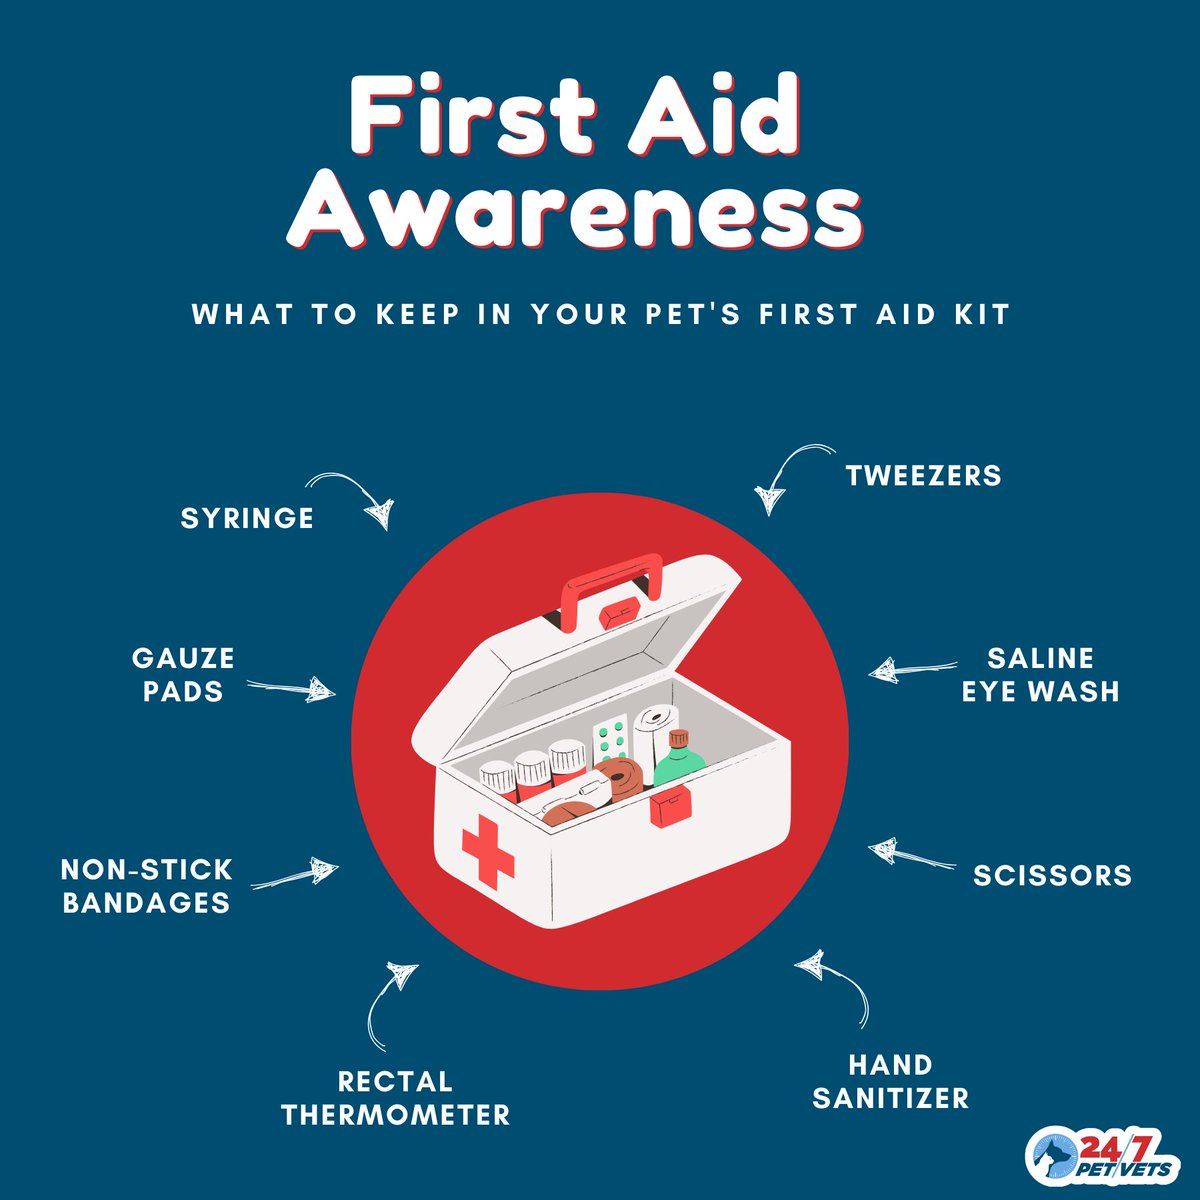 🚑 It's crucial to be prepared for any unforeseen pet emergencies. Here's what to keep in your pet's first aid kit! Being prepared could save your furry friend's life! 🐶❤️ #PetFirstAid #StayPrepared #PetSafety